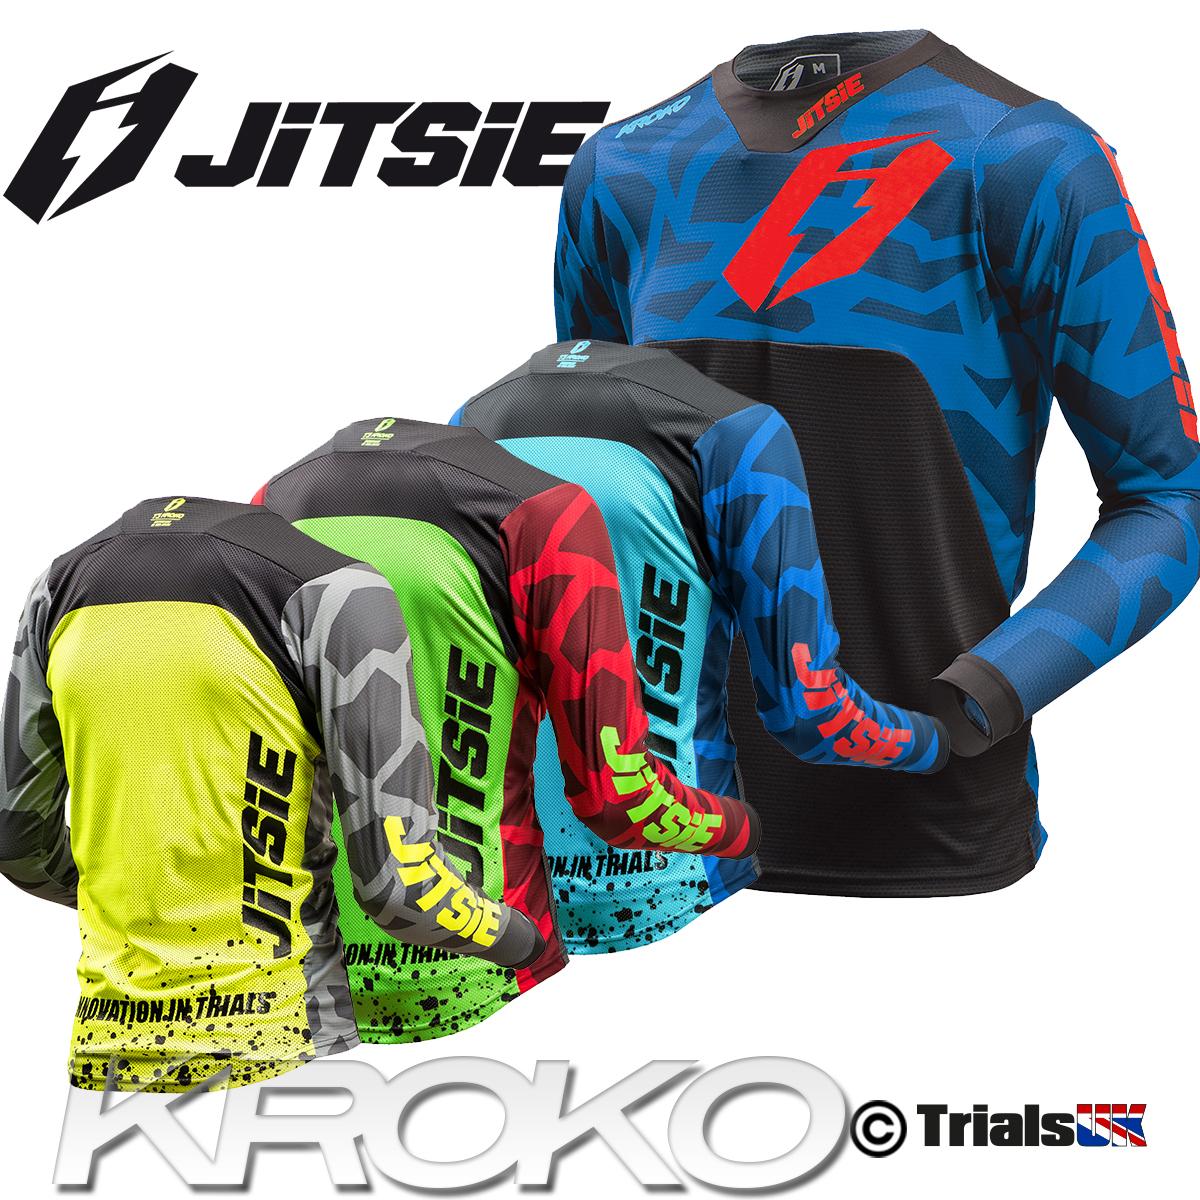 In 2 Colour Ways Jitsie 2019 Limited Edition WAVE Trials Riding Shirt